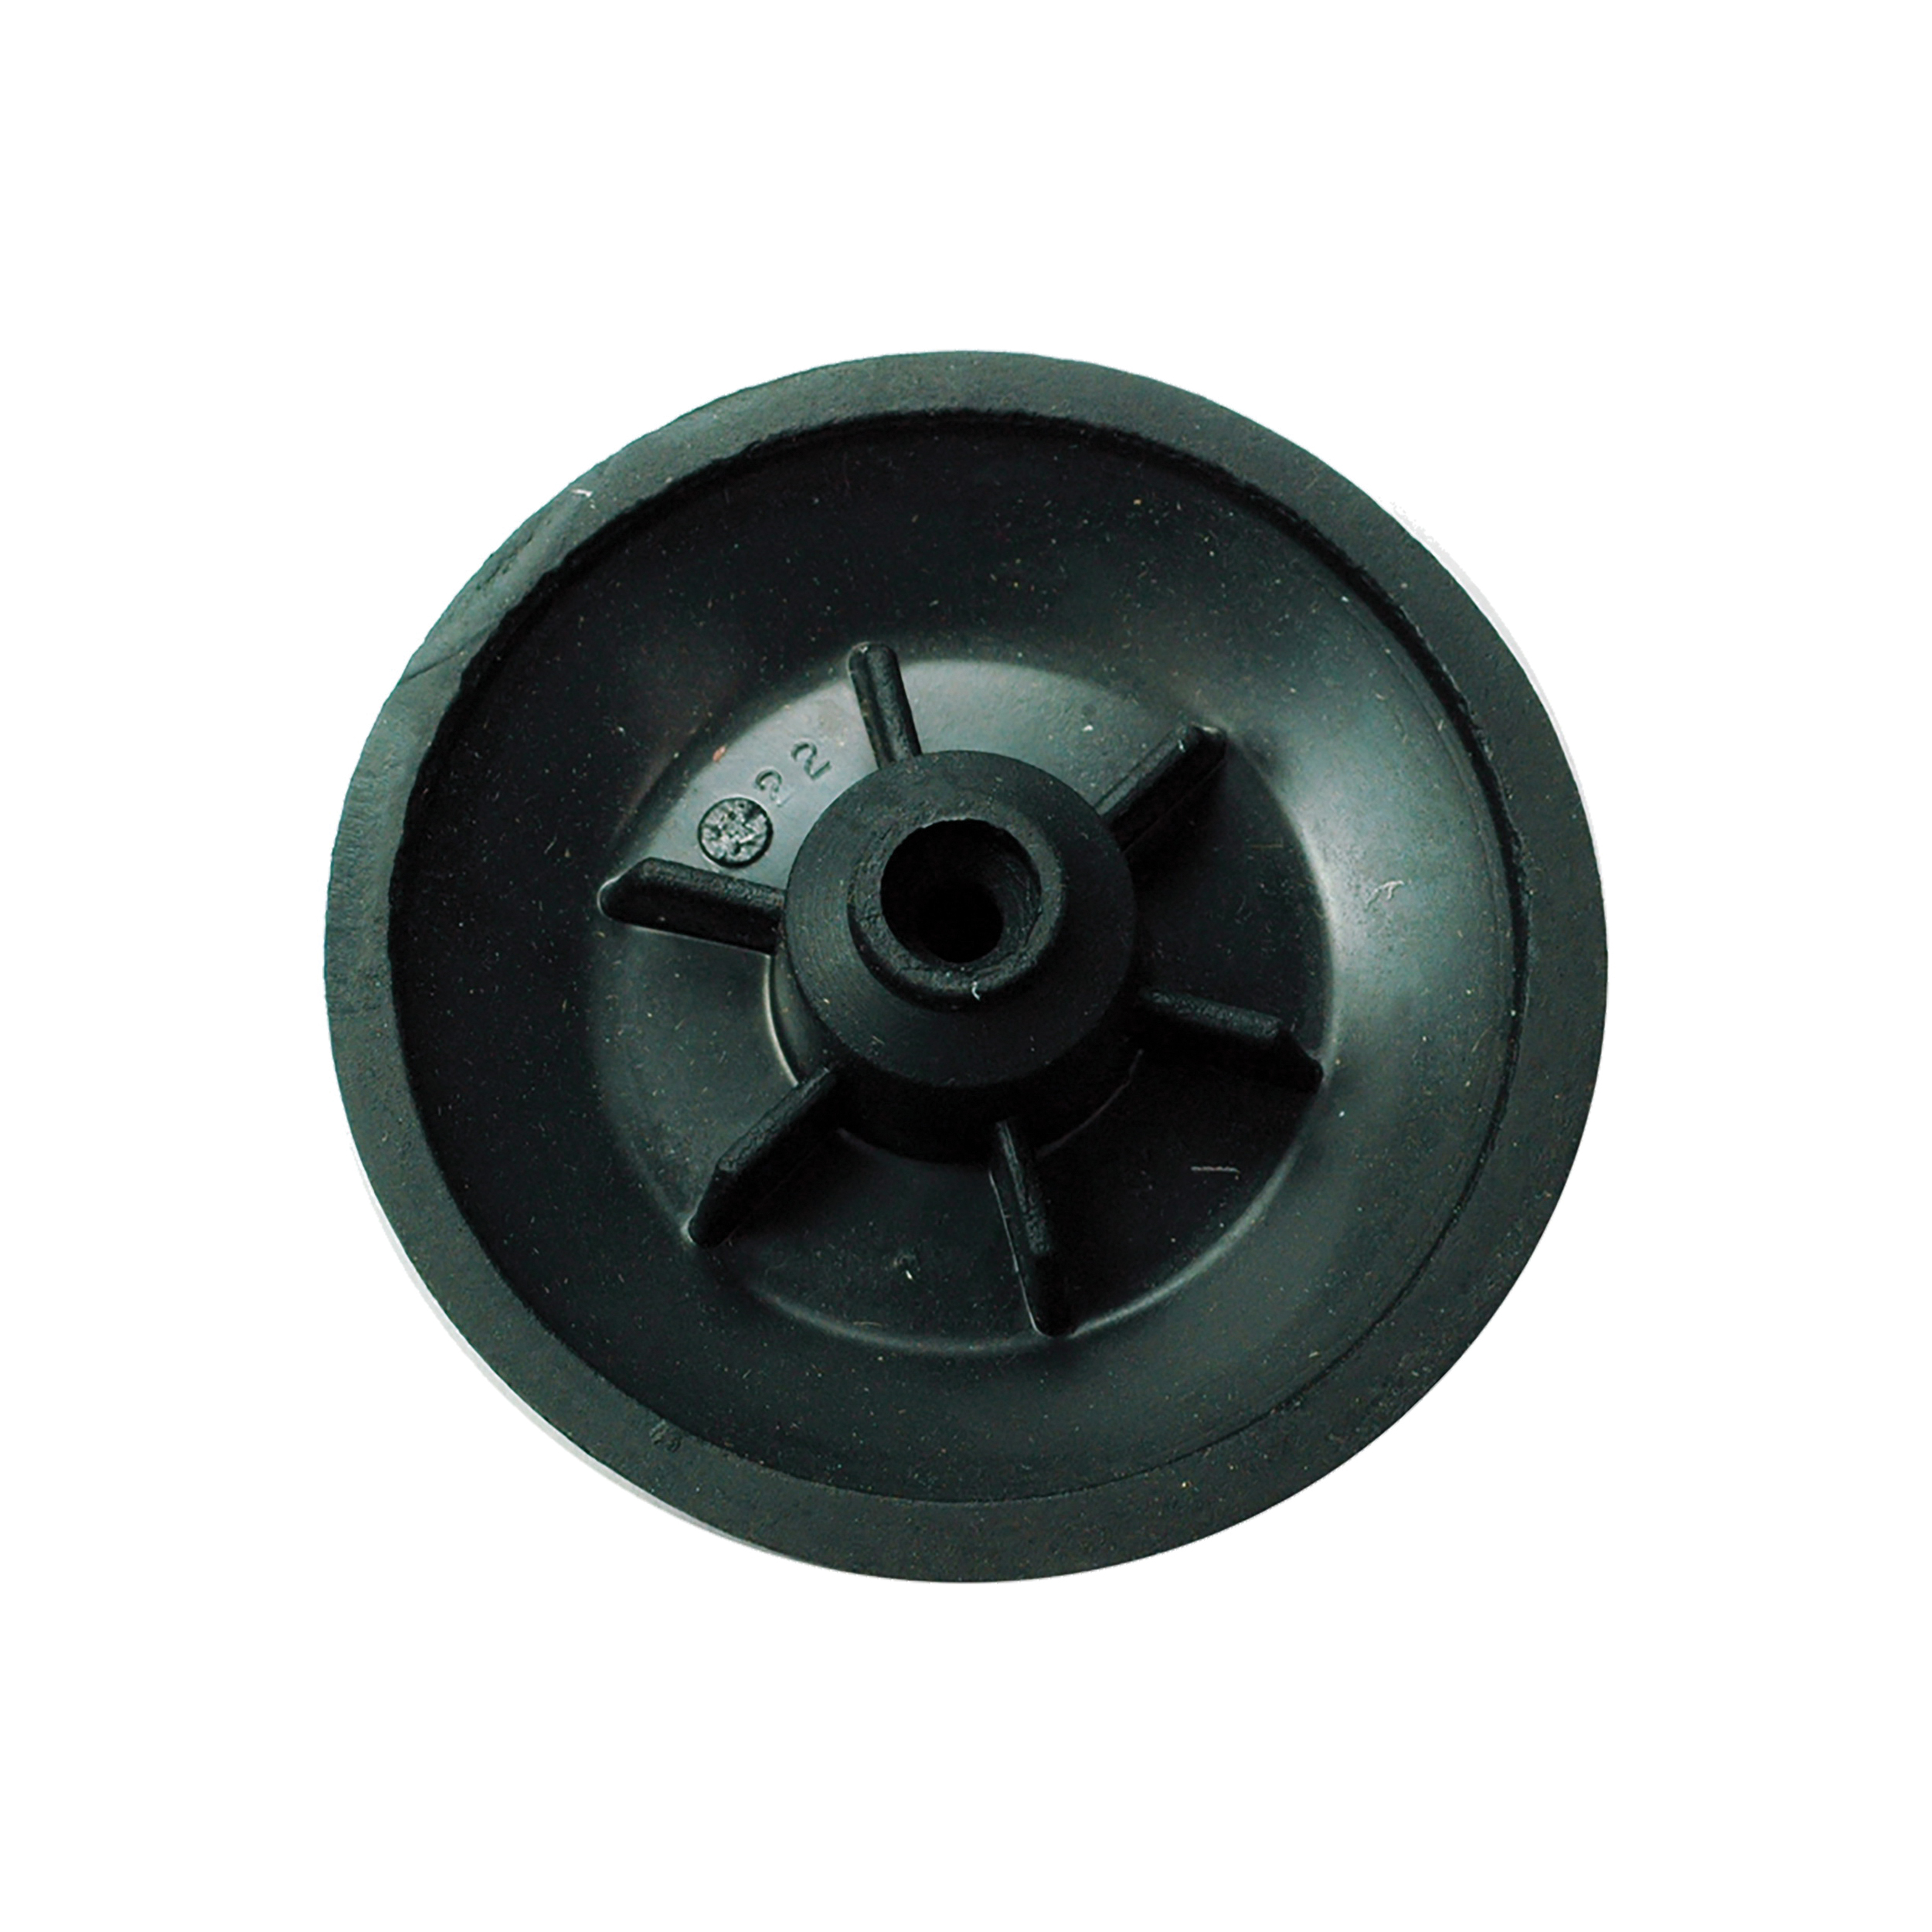 American Standard 033643-0070a Seat Disc Replacement Part for sale online 